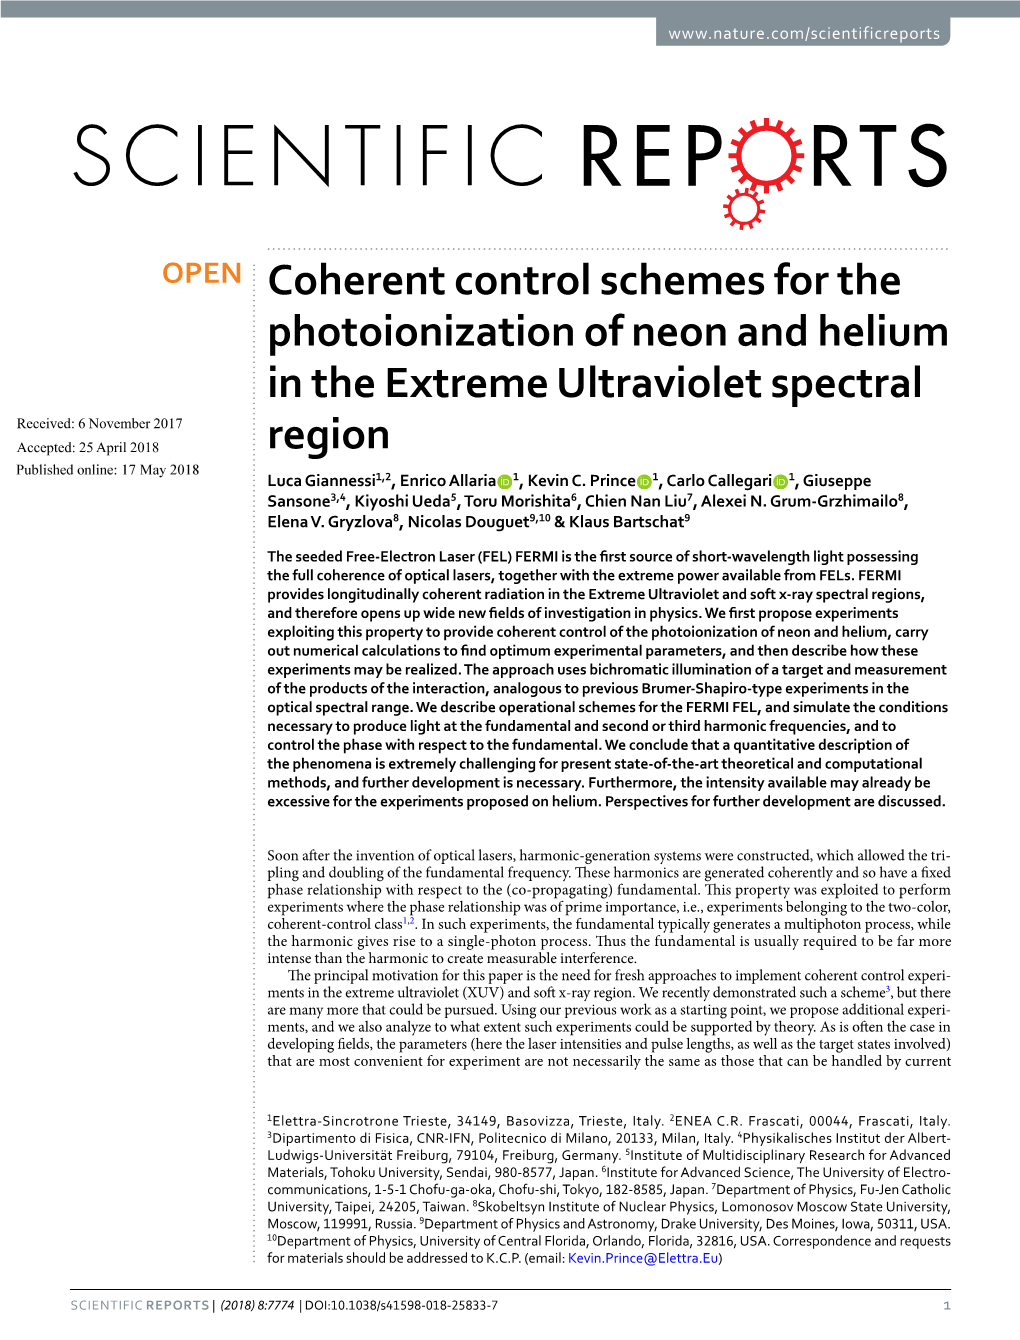 Coherent Control Schemes for the Photoionization of Neon and Helium